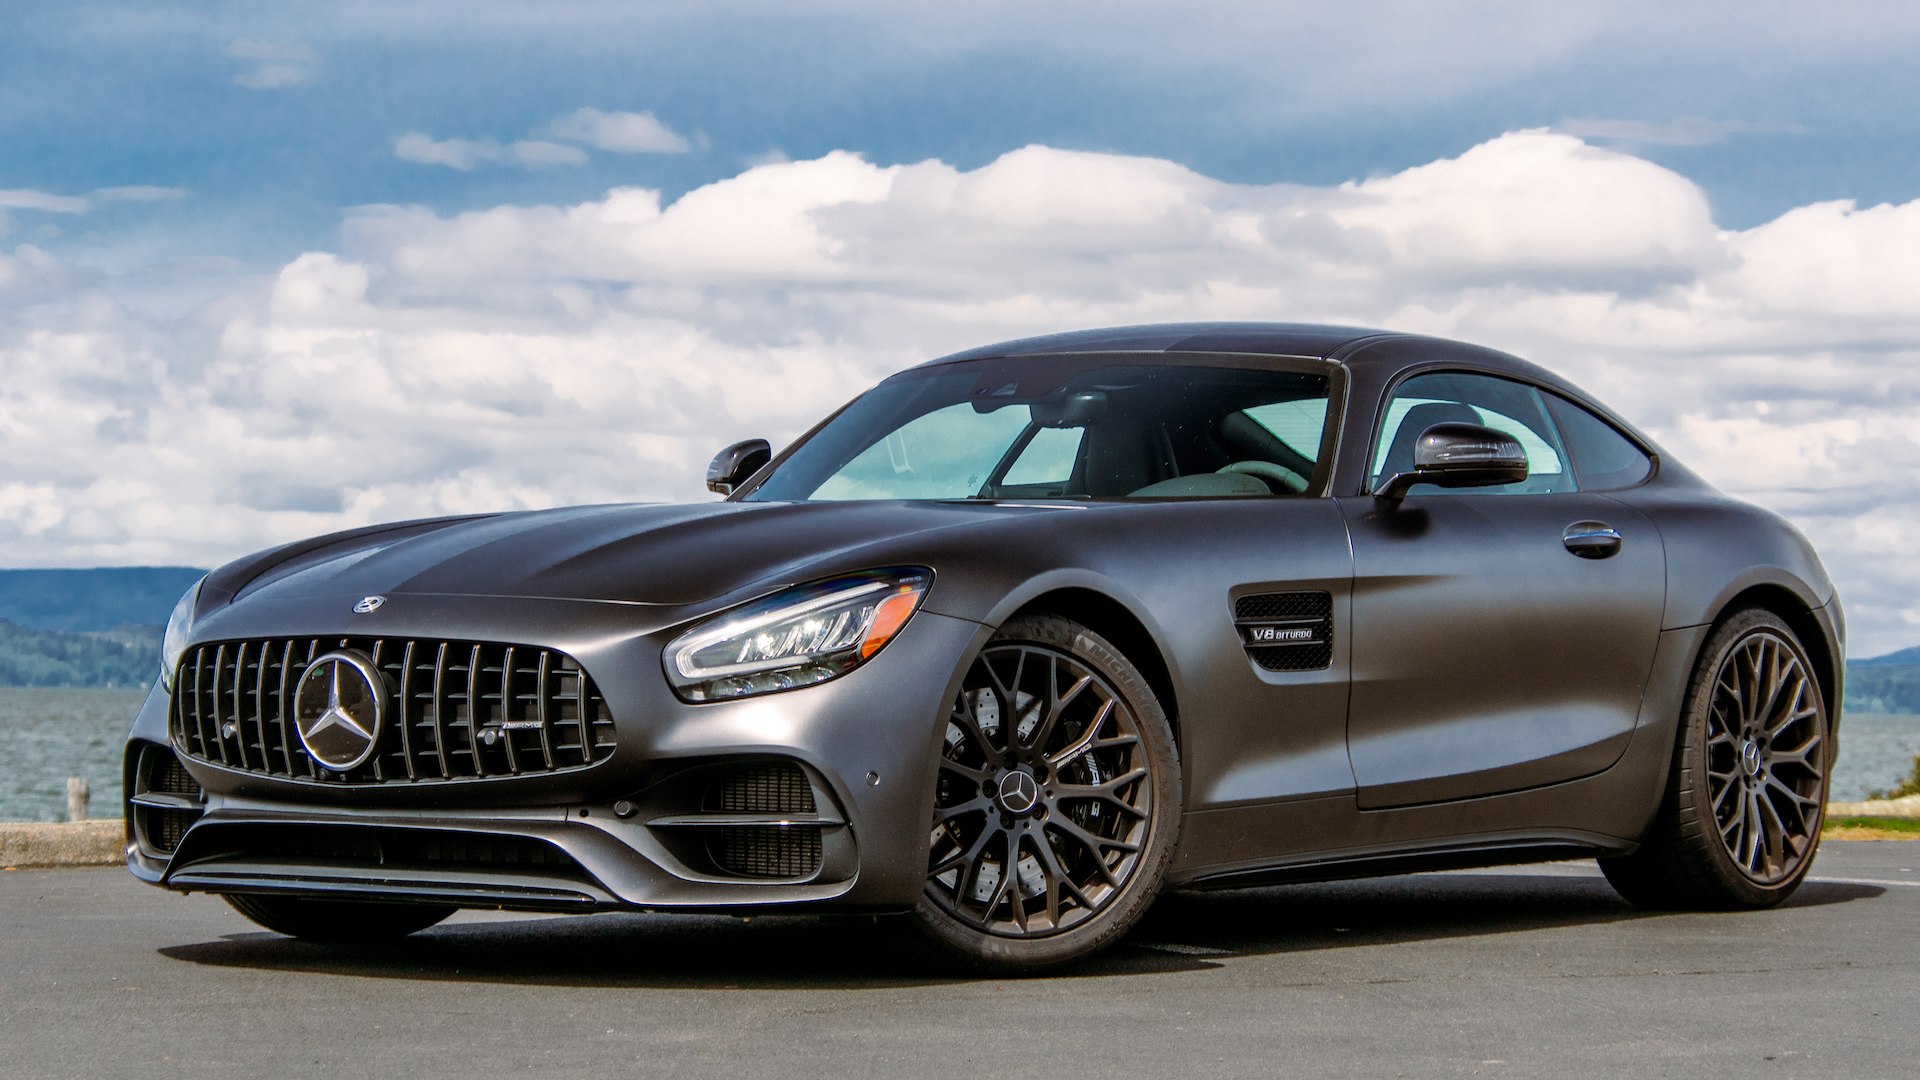 https://www.thedrive.com/uploads/2022/07/21/2021-Mercedes-AMG-GT-Stealth-Edition.jpg?auto=webp